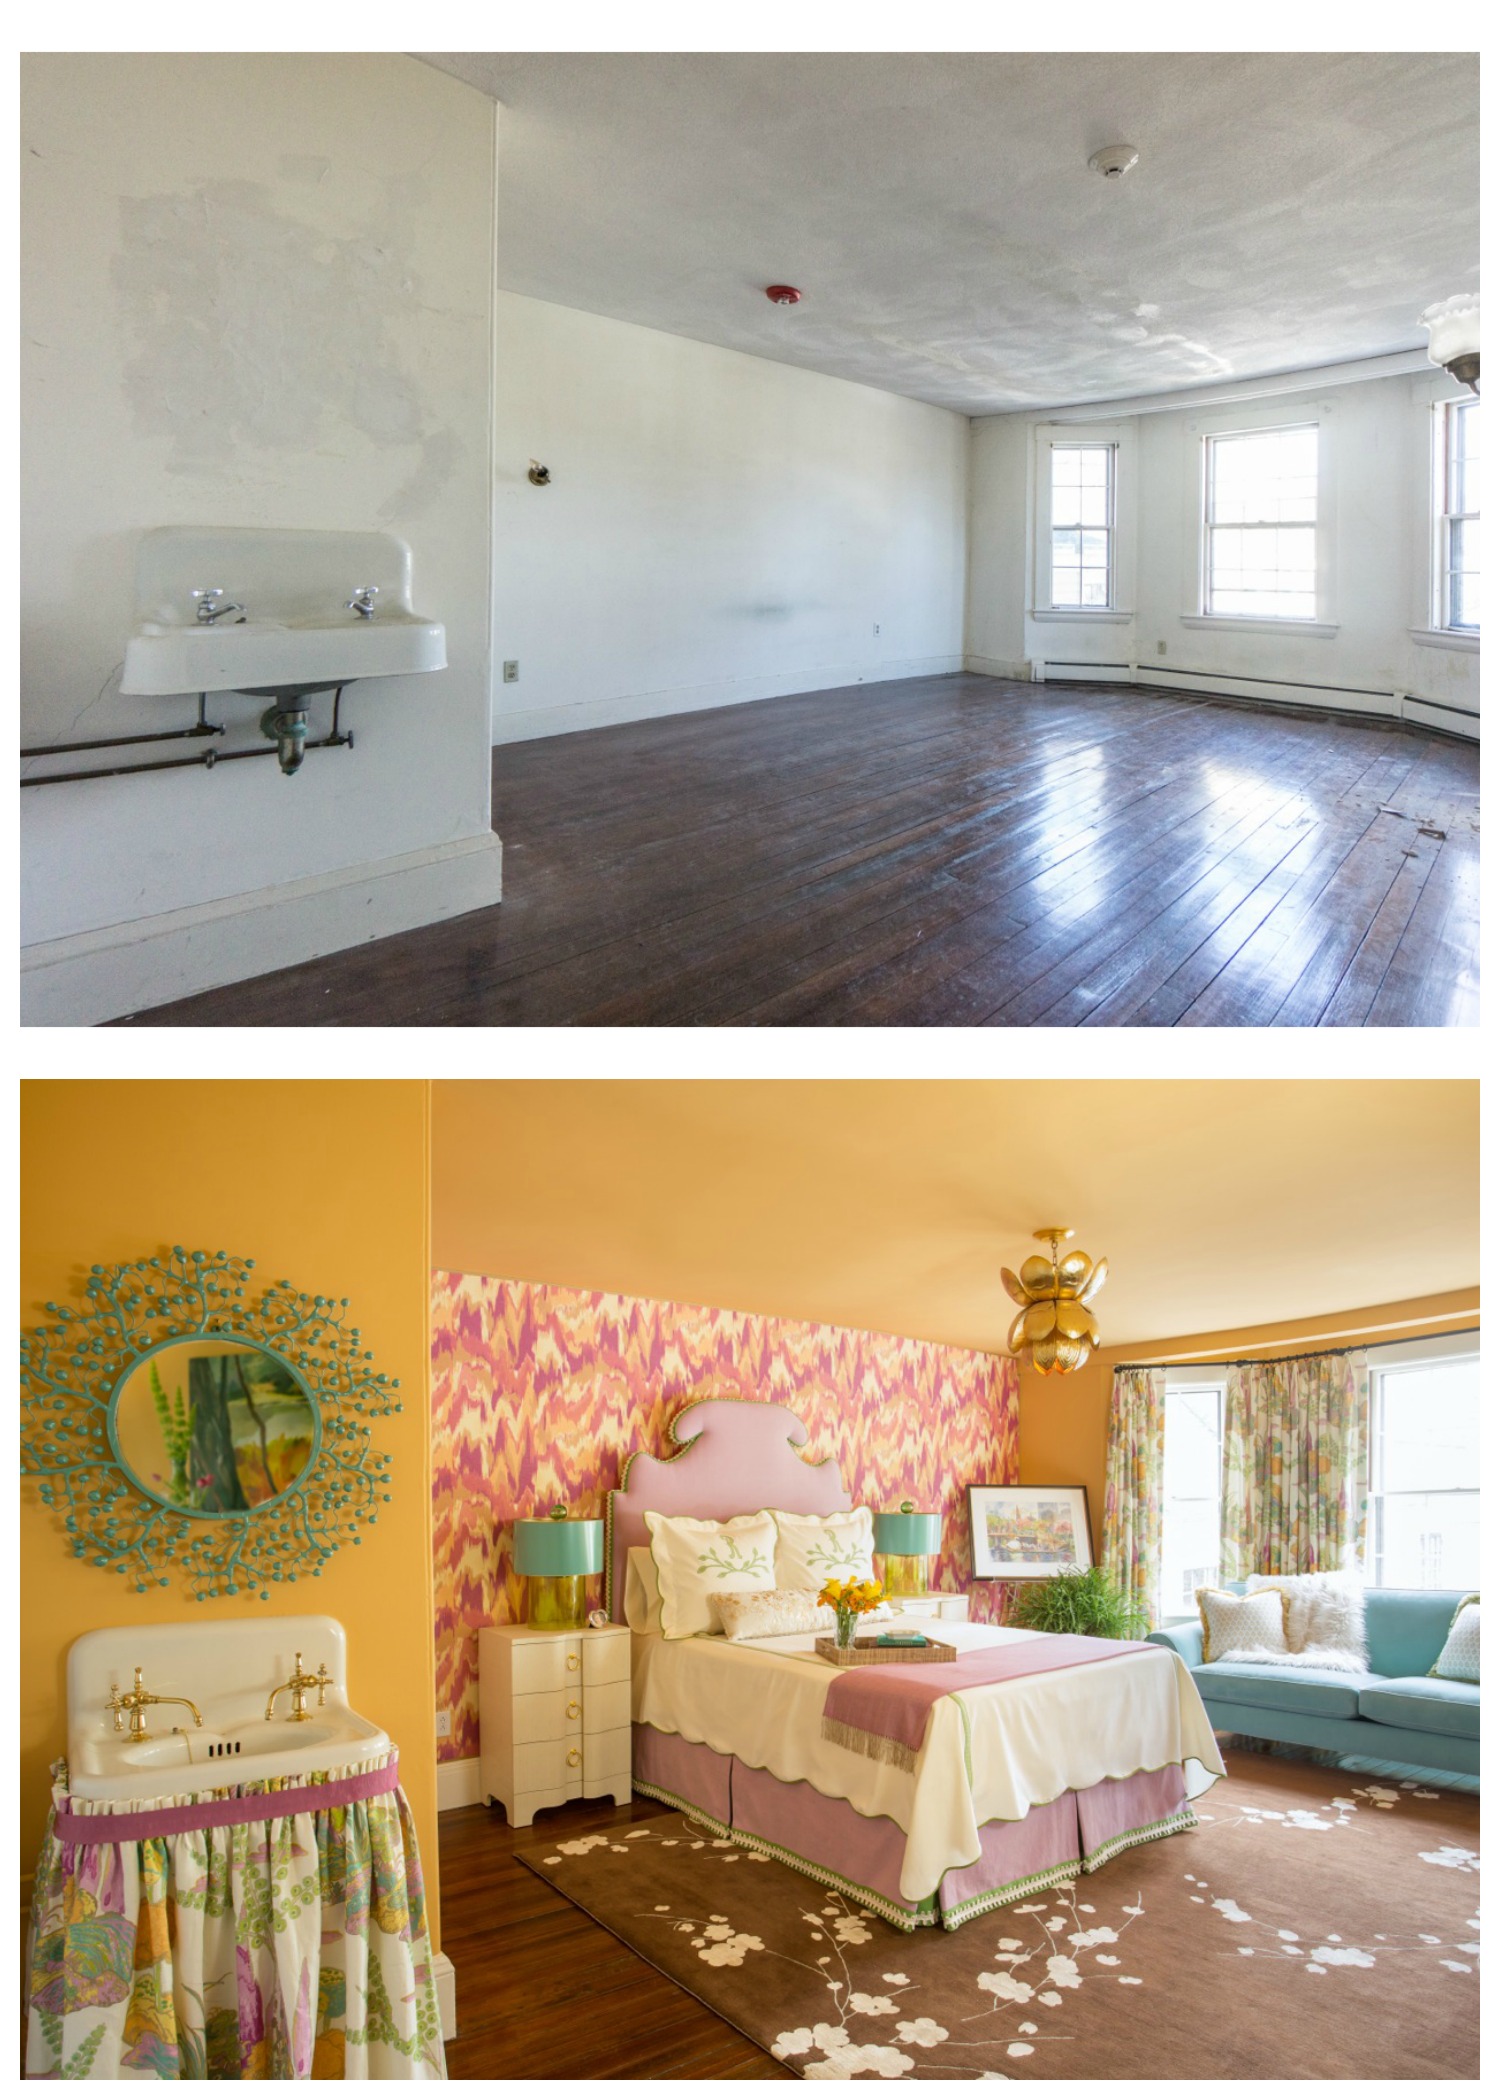 jlbshowhouse_beforeafter